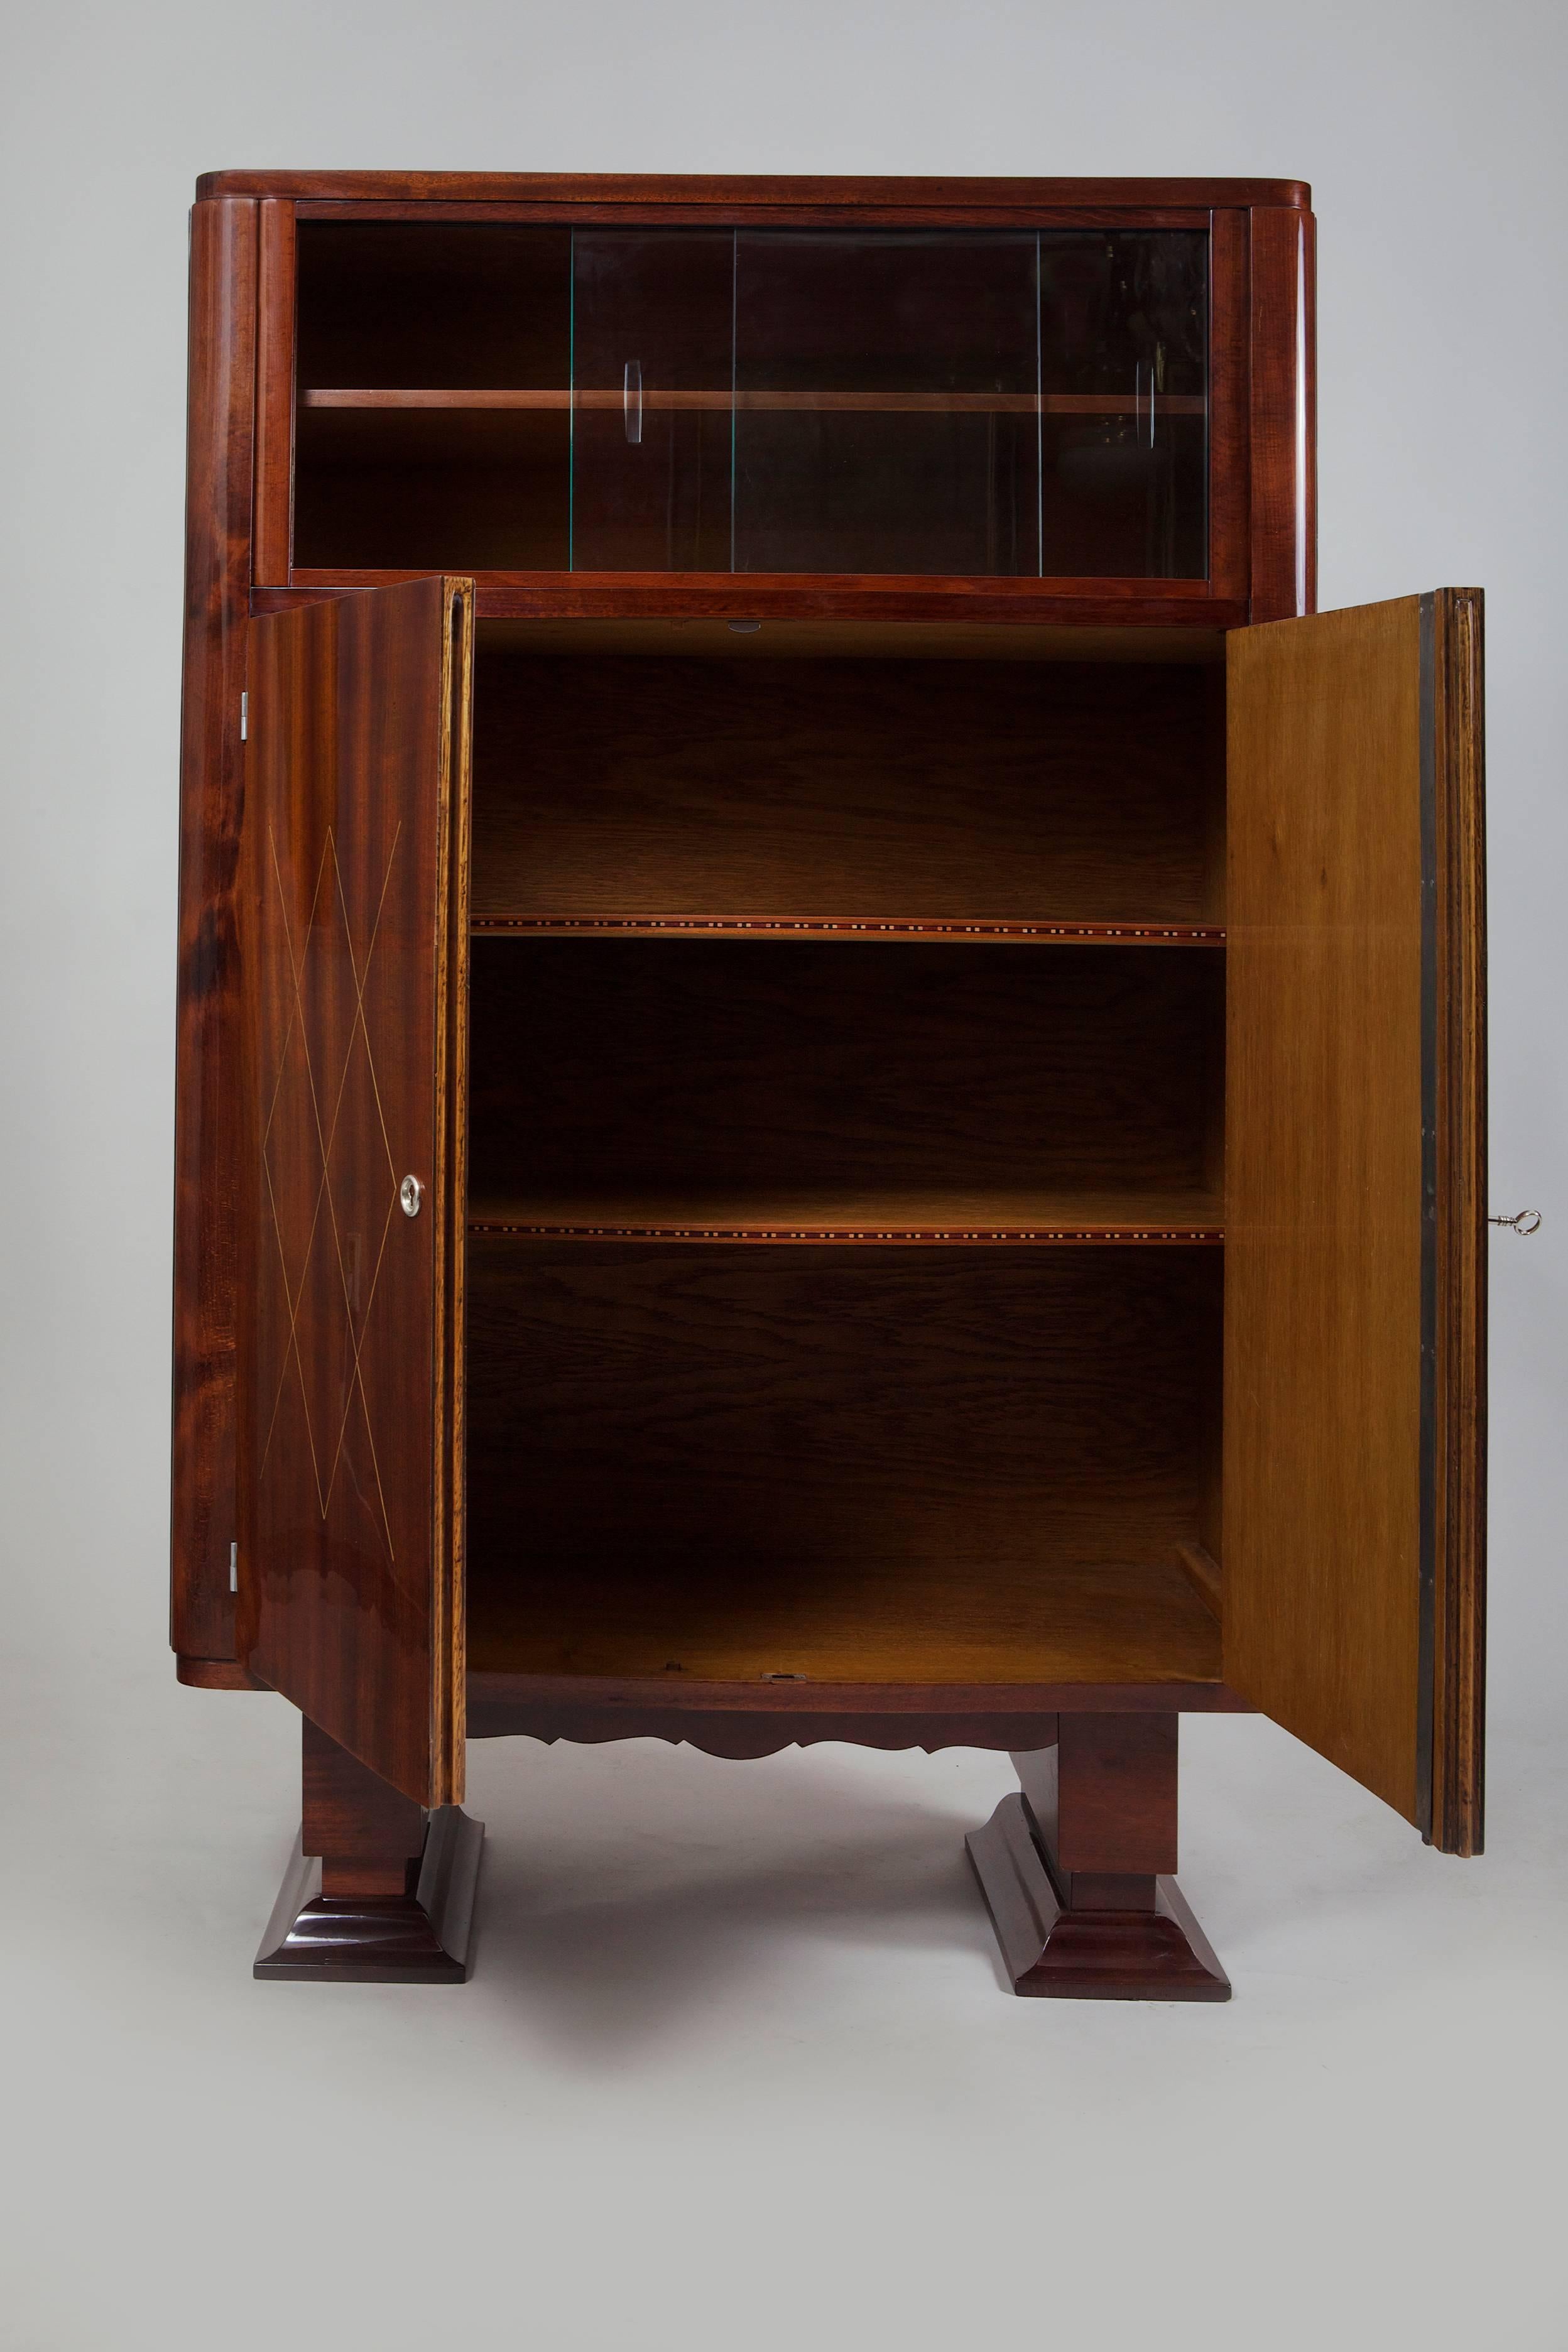 20th century Art Deco display cabinet
Completely restored to the high gloss.
Material: Mahogany.

We guarantee safe a the cheapest air transport from Europe to the whole world within 7 days.
The price is the same as for ship transport but delivery